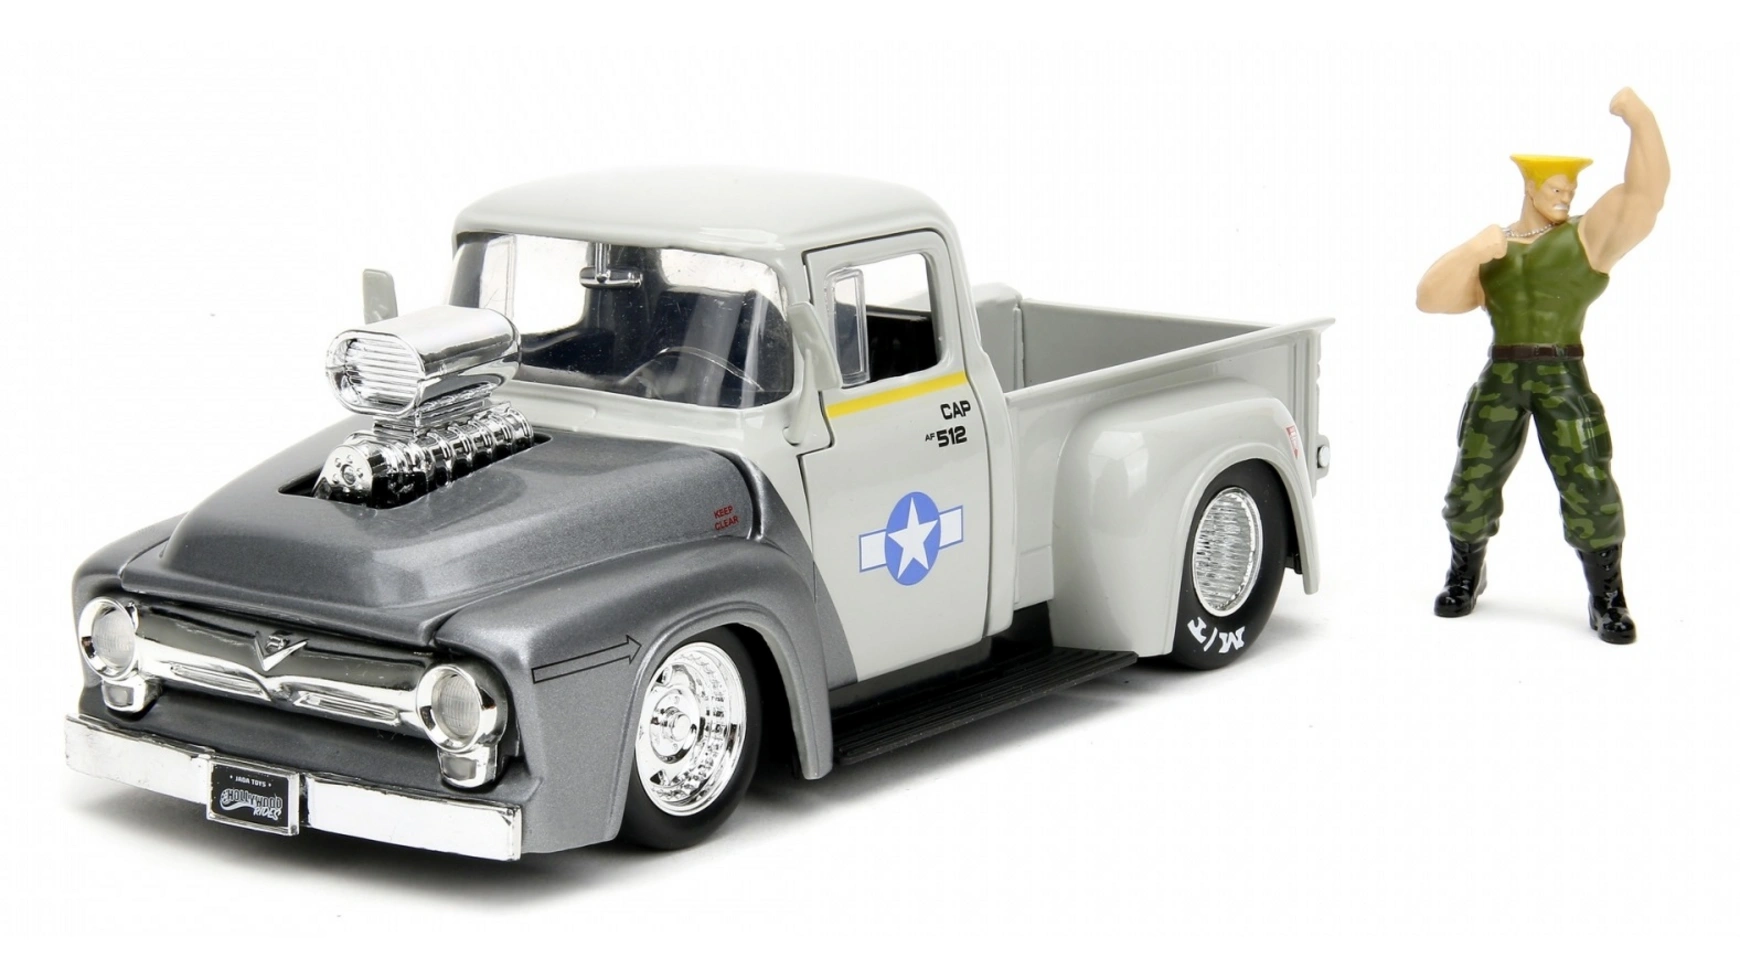 Jada Street Fighter Ford Pickup 1956 года 1:24 фигурка утка tubbz street fighter guile